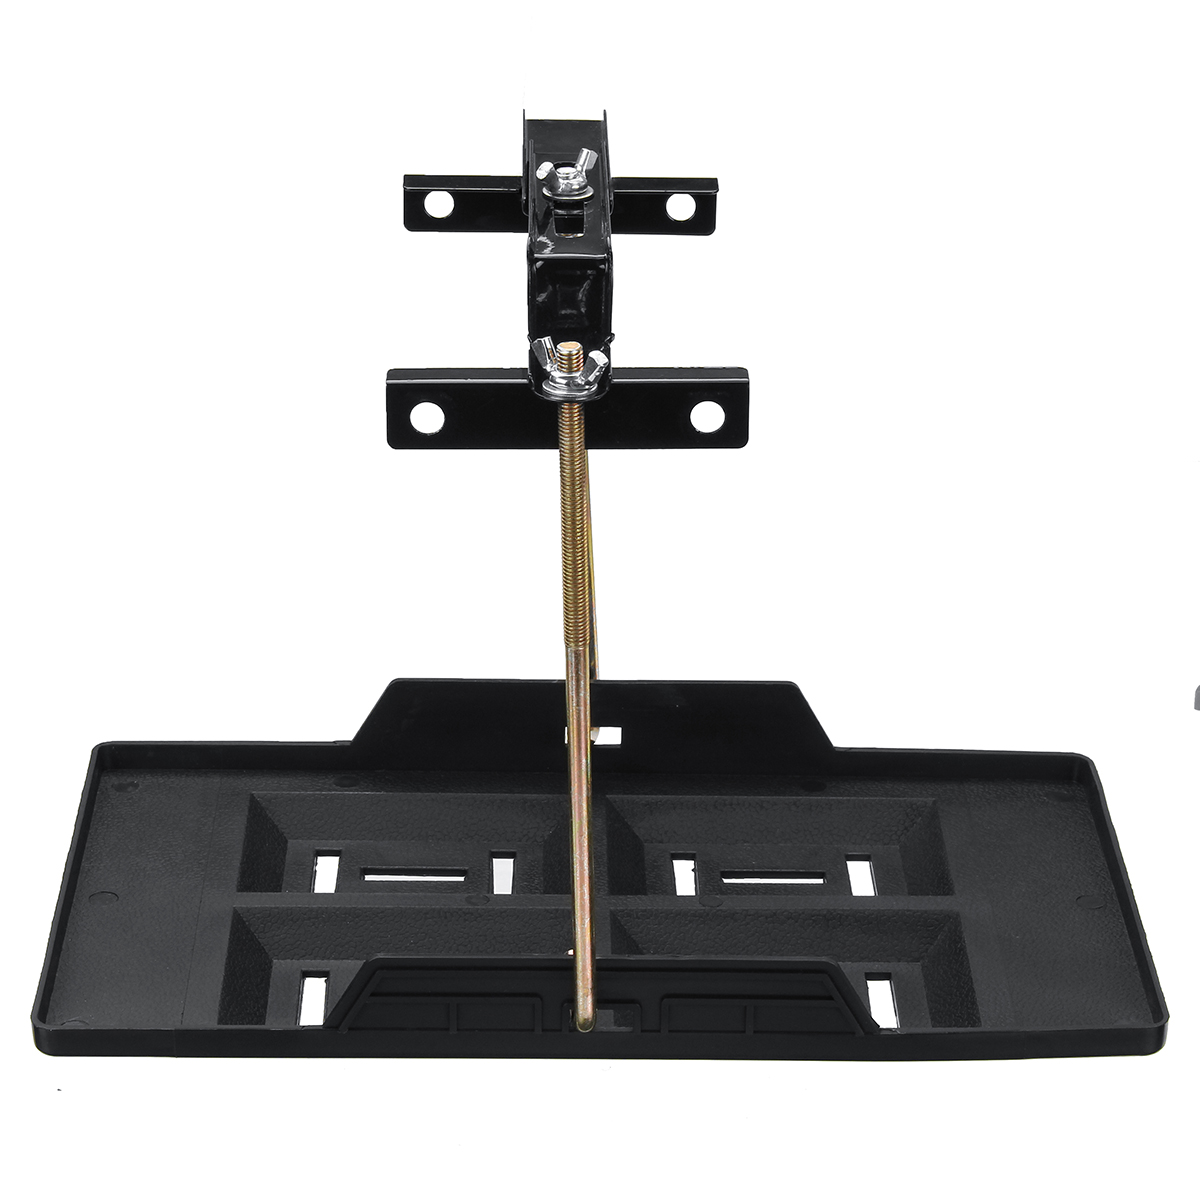 23x34.5CM Universal Battery Tray Adjustable Hold Down Clamp kit Cycle Sturdy Metal Construction